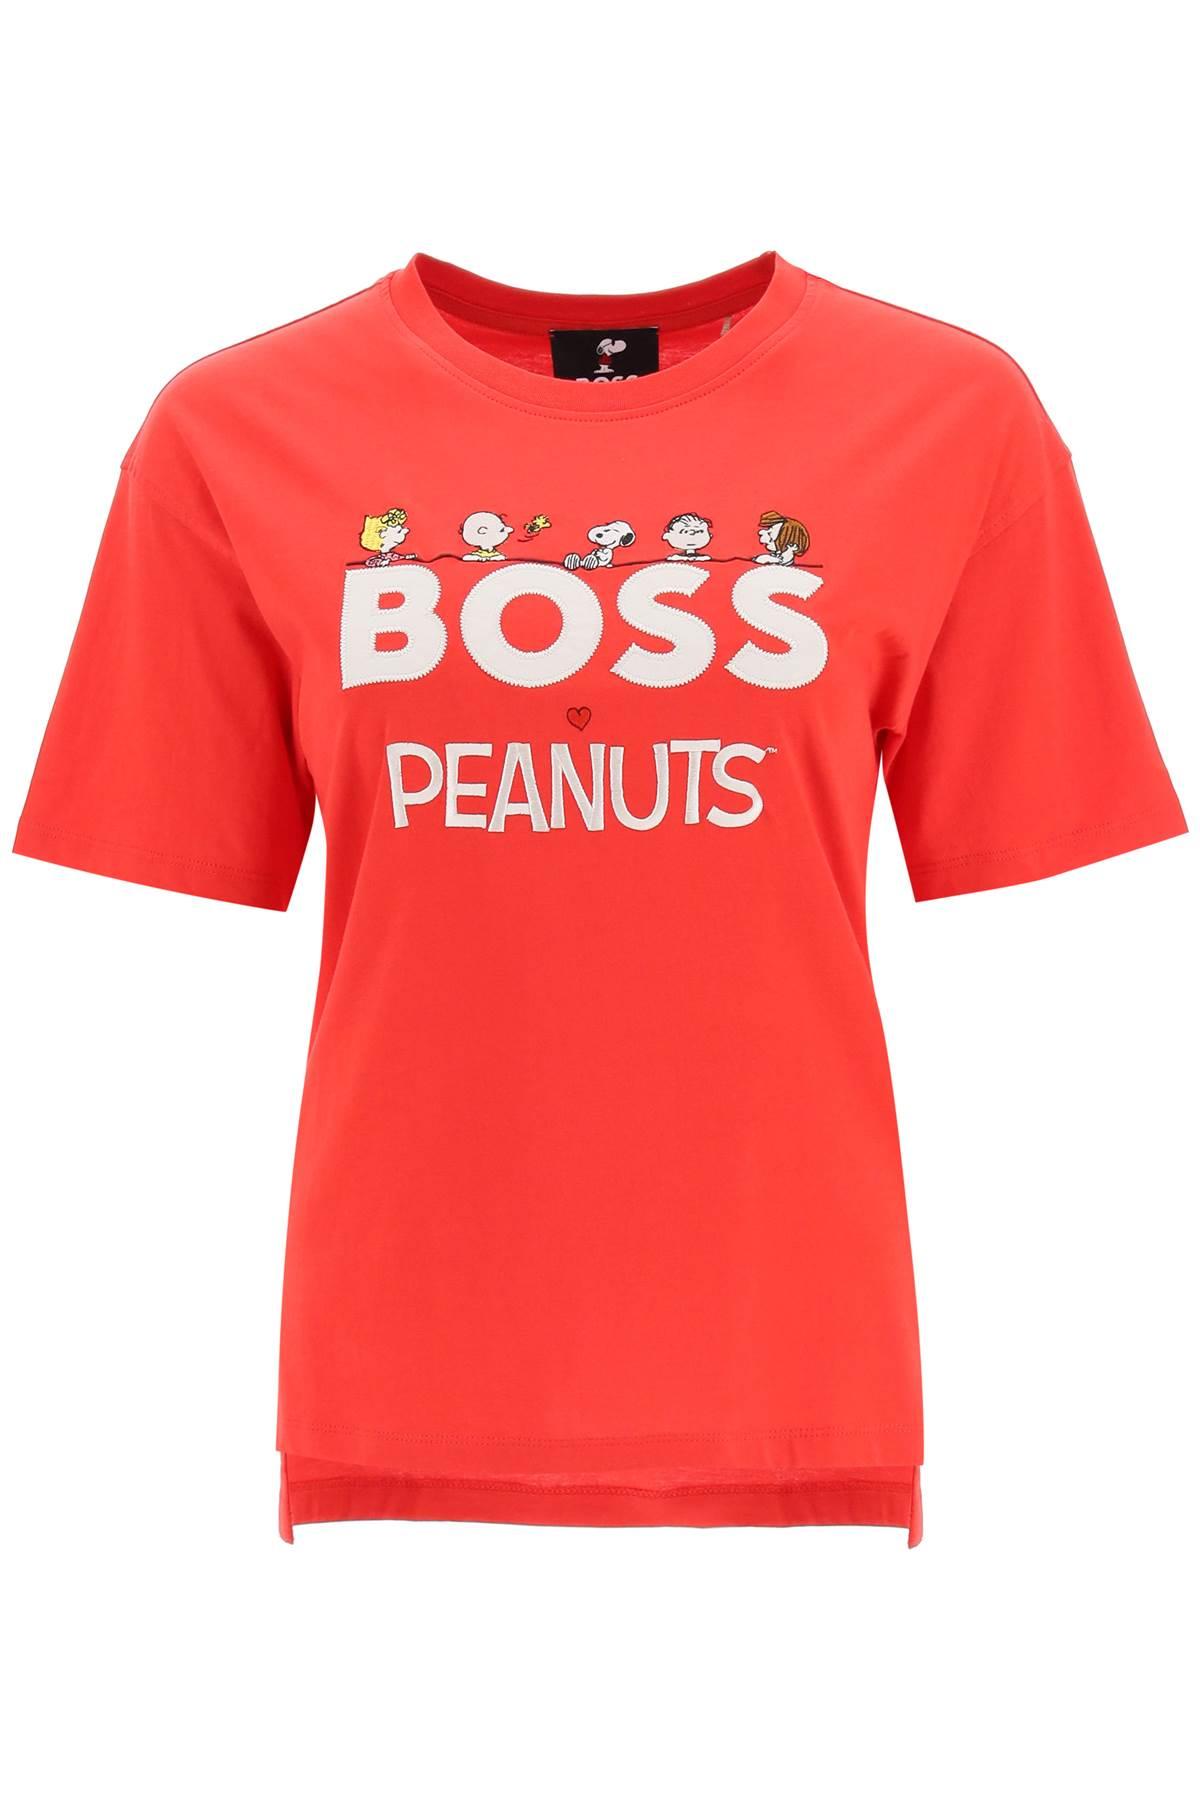 BOSS by HUGO BOSS Peanuts T-shirt in Red | Lyst